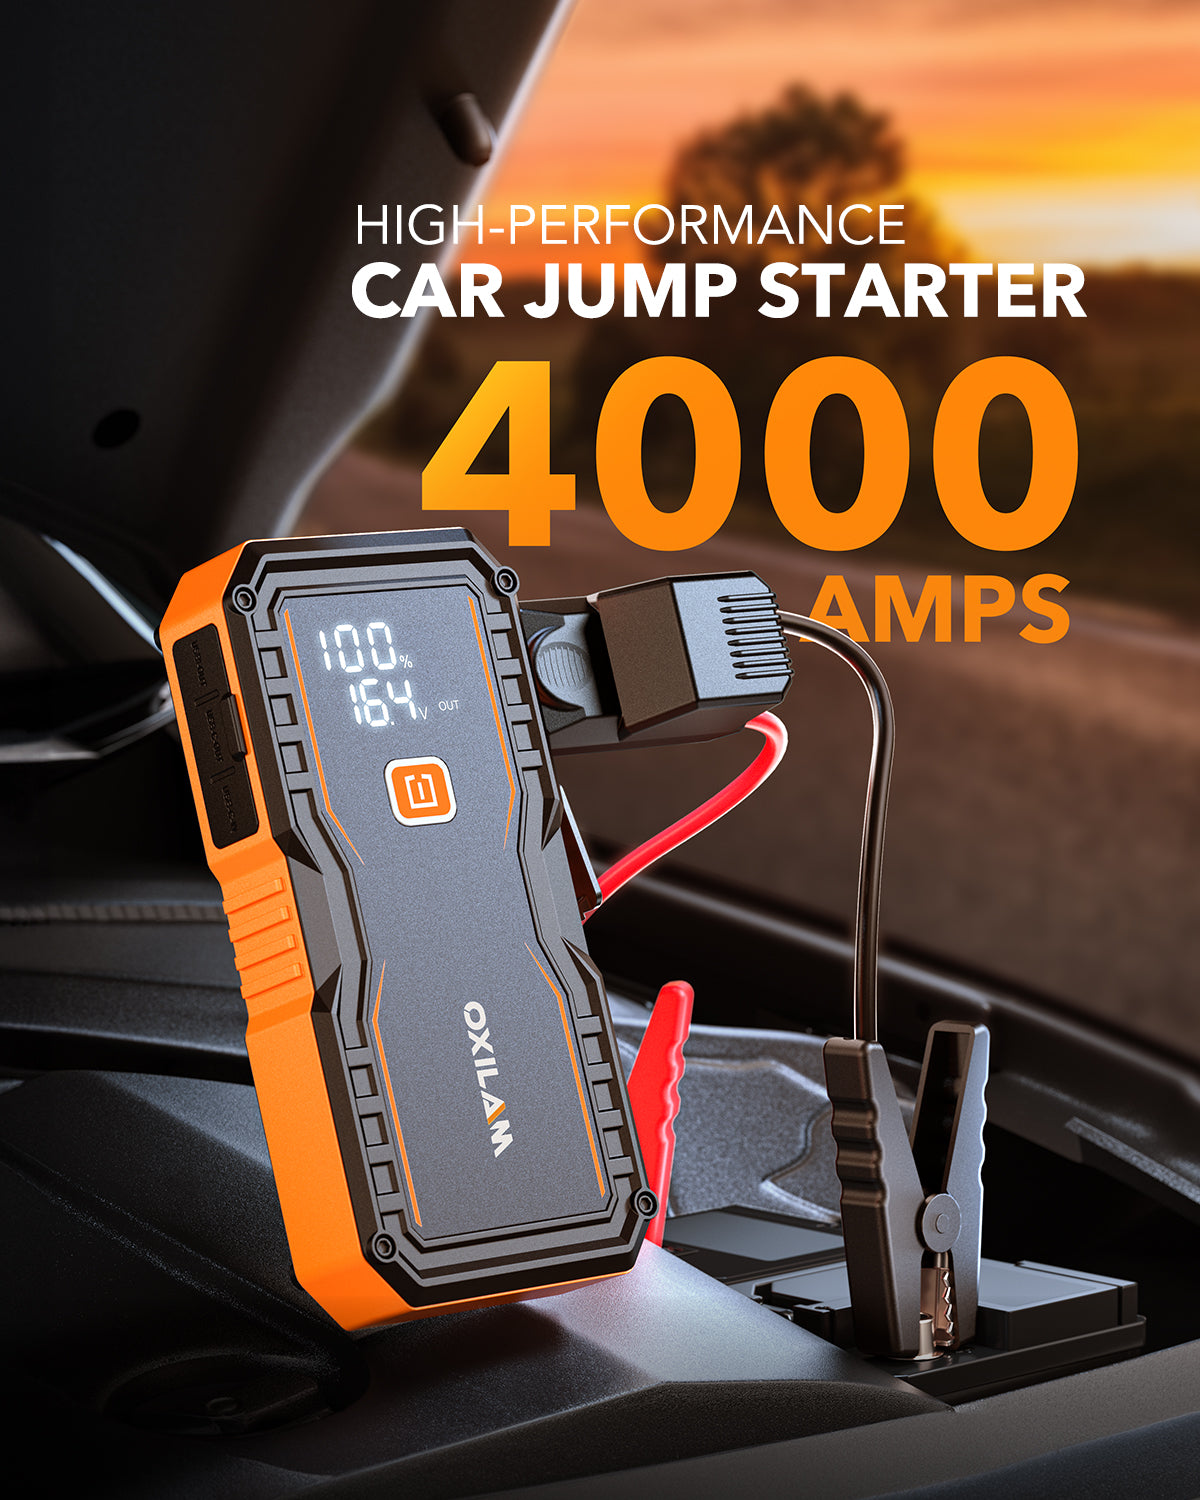 OXILAM Jump Starter Y2 4000A for All Gas/8L Diesel, Car Battery Jumper Starter Portable, UltraSafe 12V Lithium Jump Box with Jumper Cables, LED Display, LED Light, Power Bank with USB, Type C Port